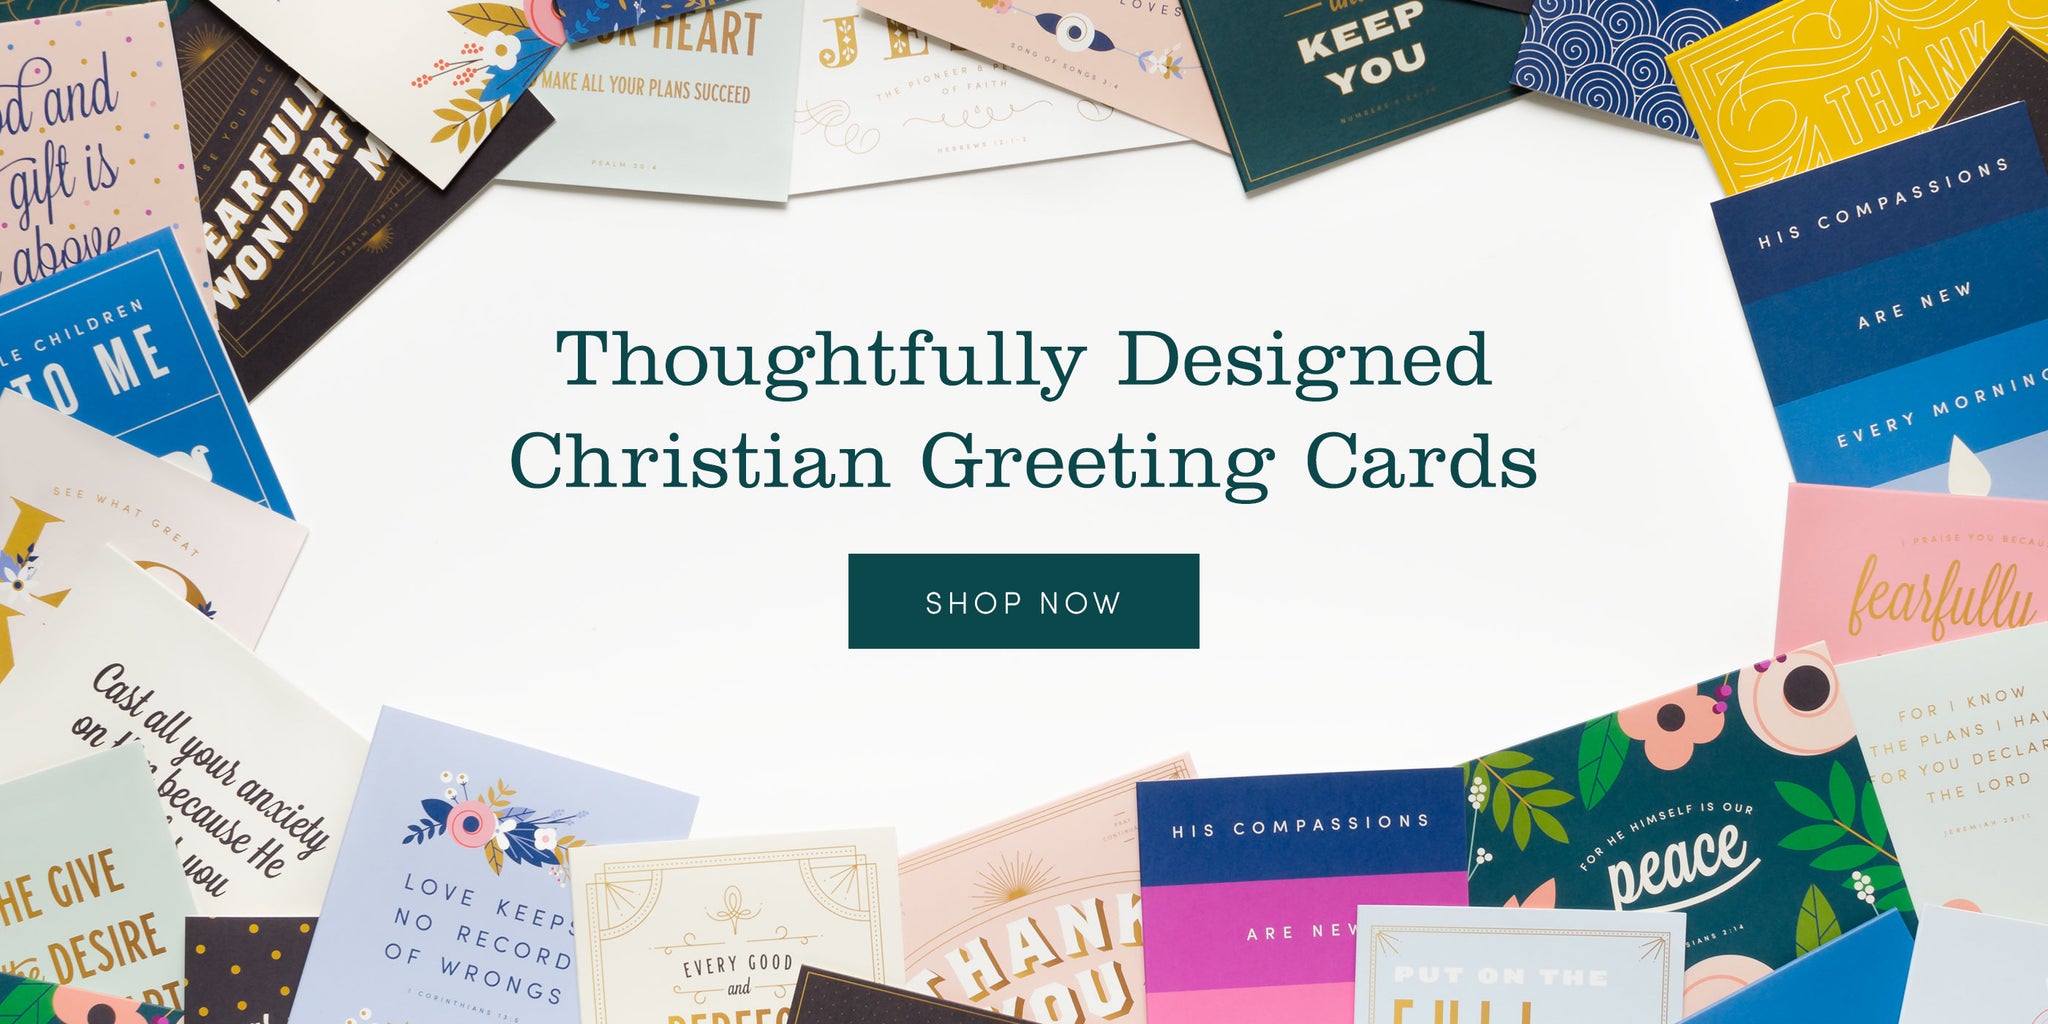 Thoughtfully designed Christian greeting cards